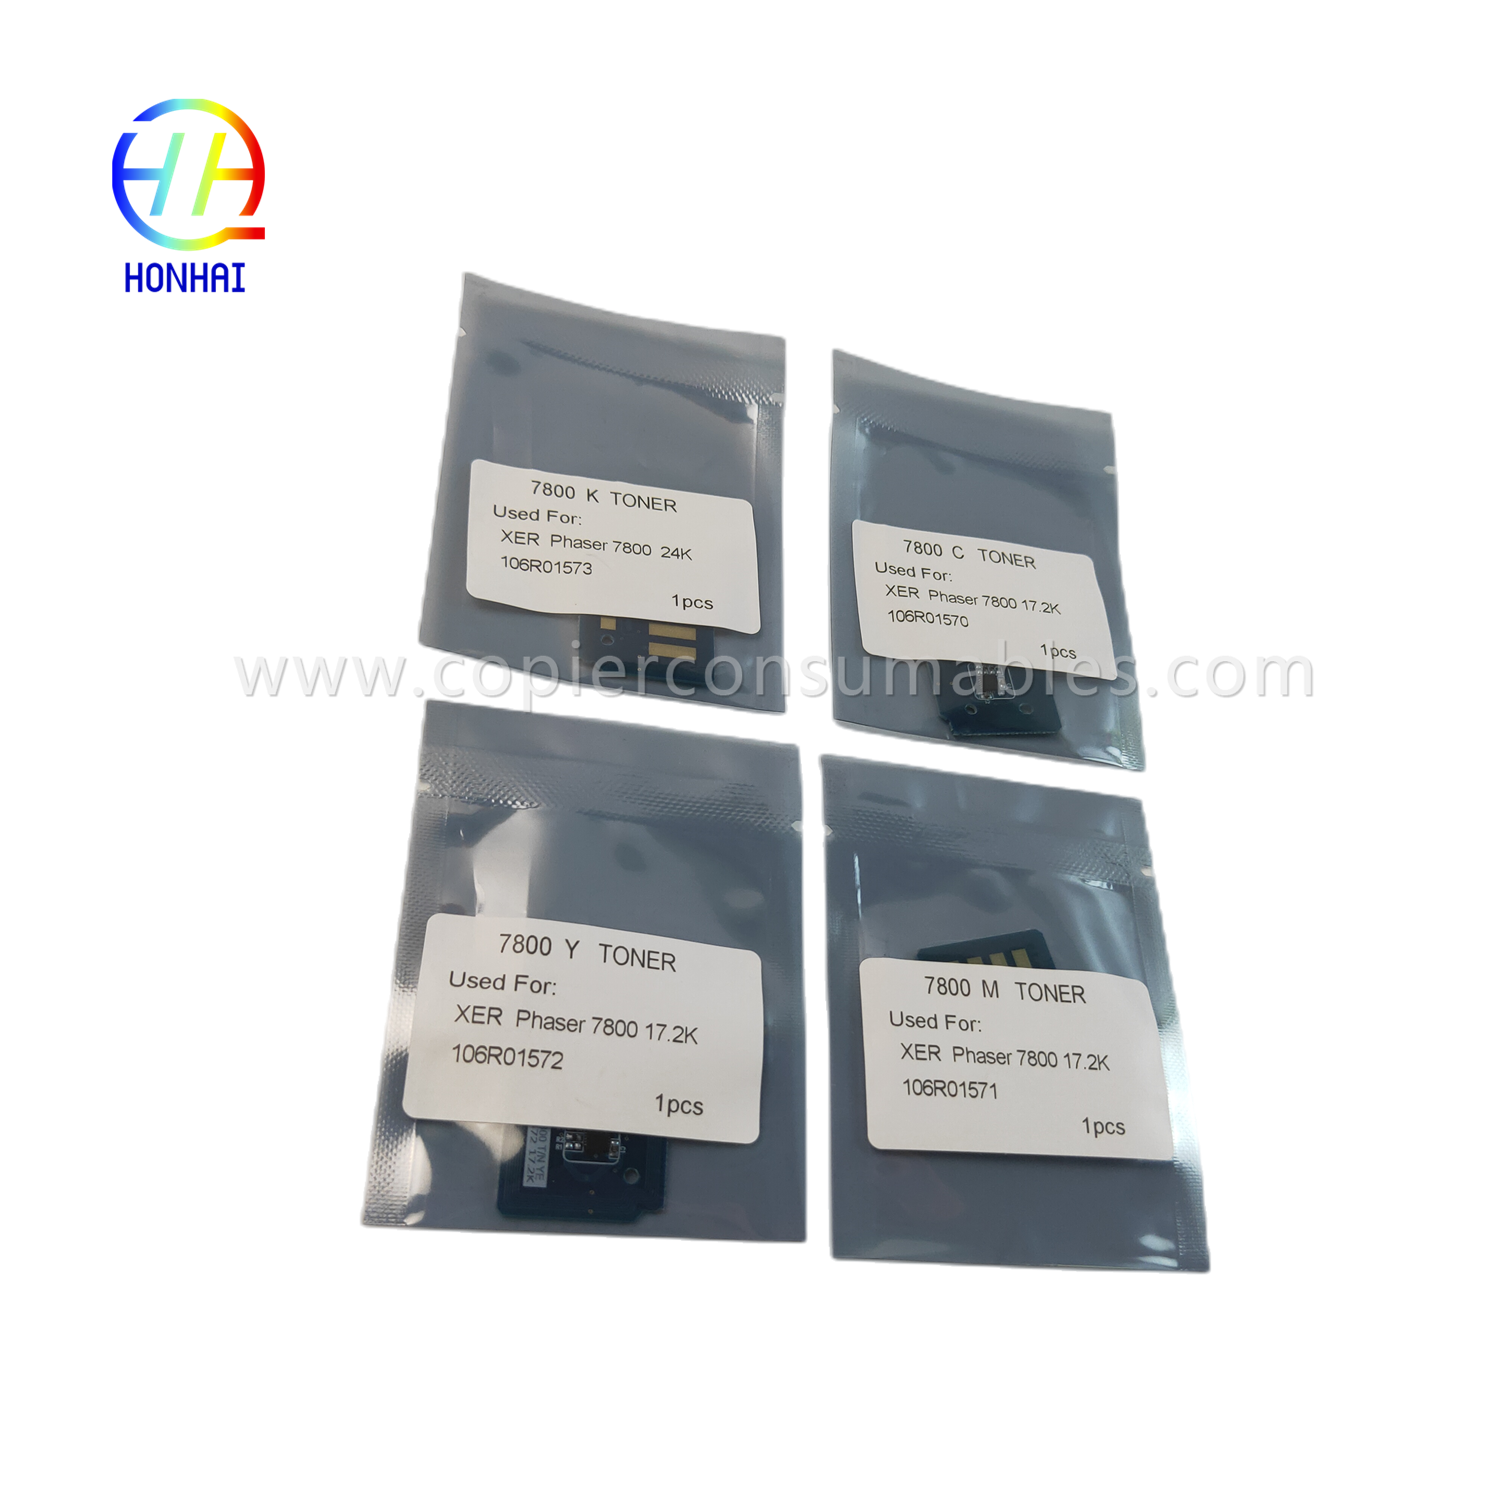 Toner Chip (set) for Xerox Phaser 7800 106R01573 106R01570 106R01571 106R01572 Chip (4)